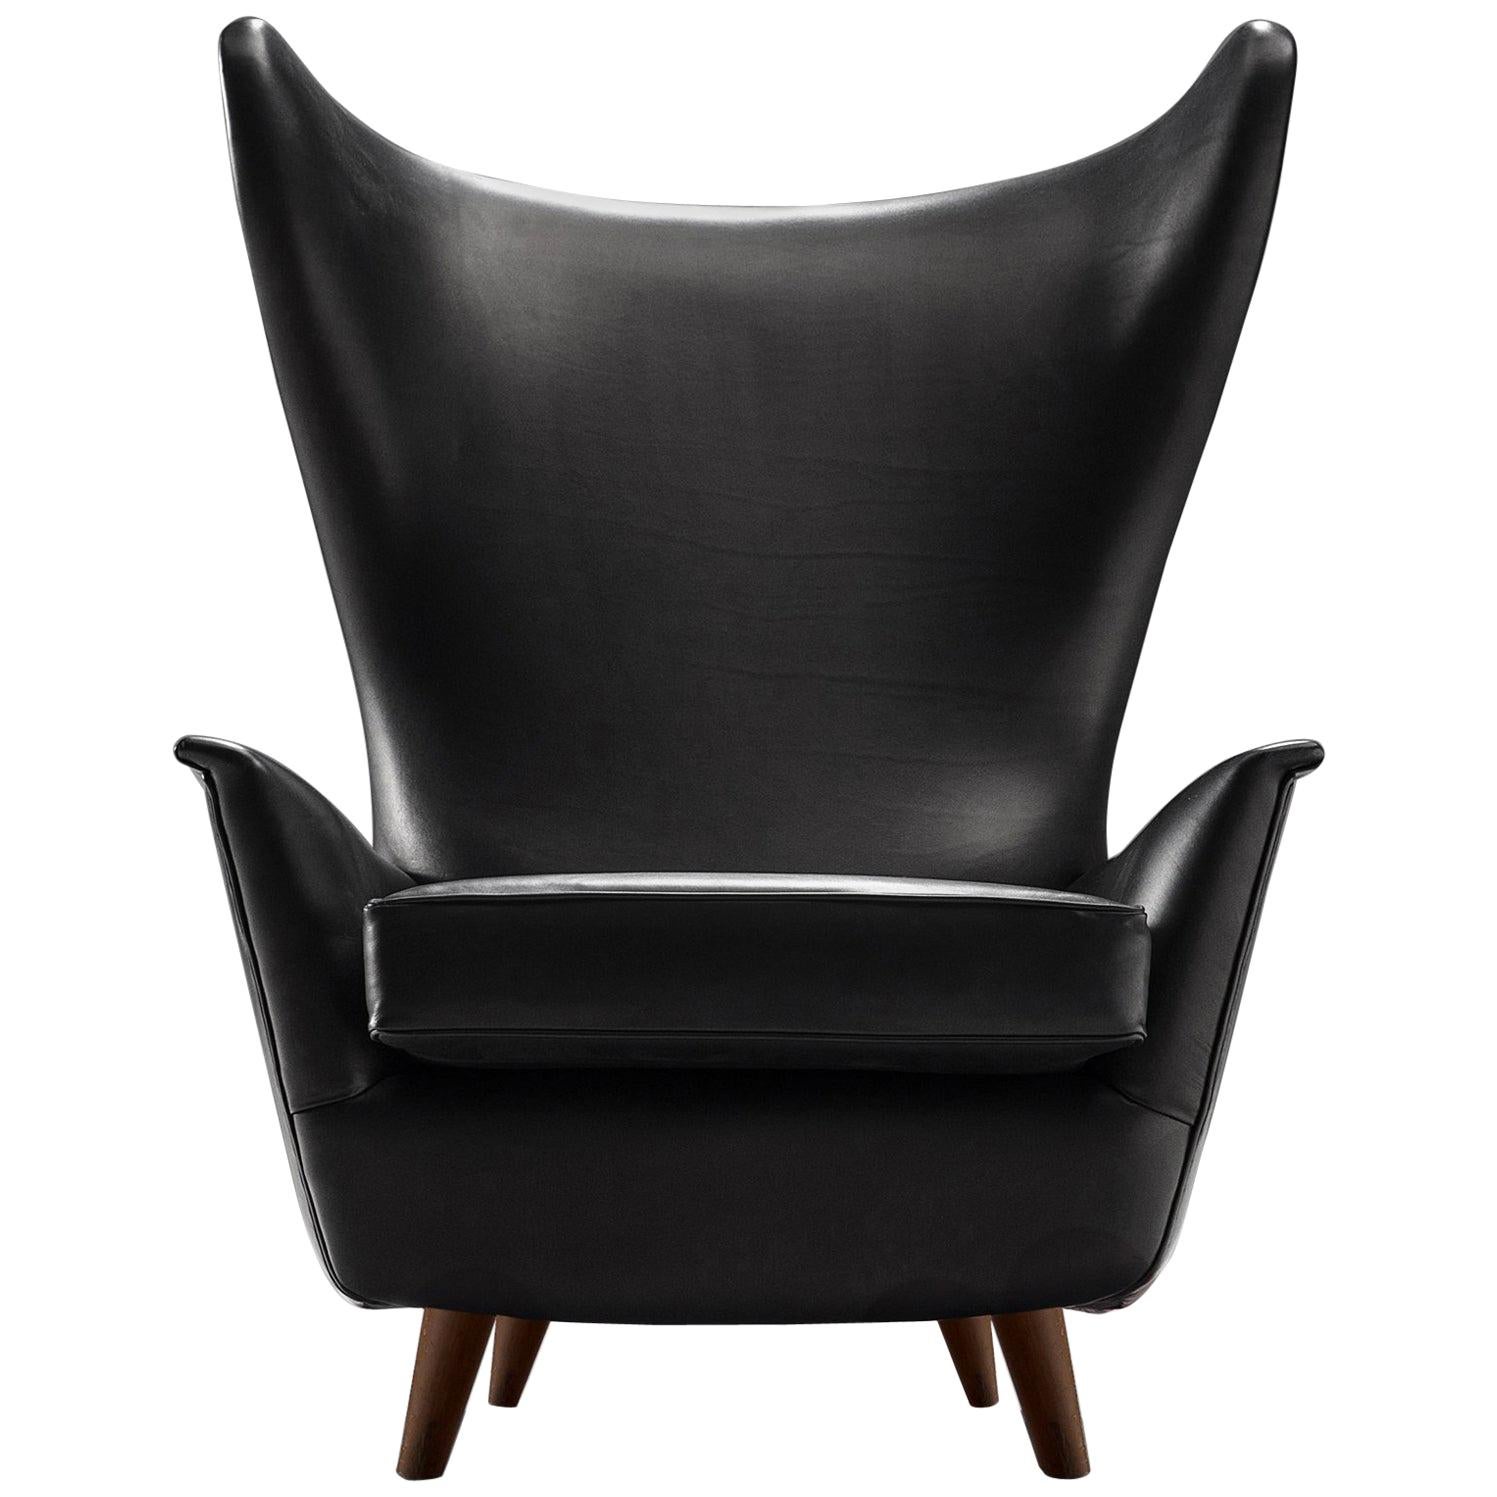 Grand Italian Wingback Chair Reupholstered in Black Aniline Leather